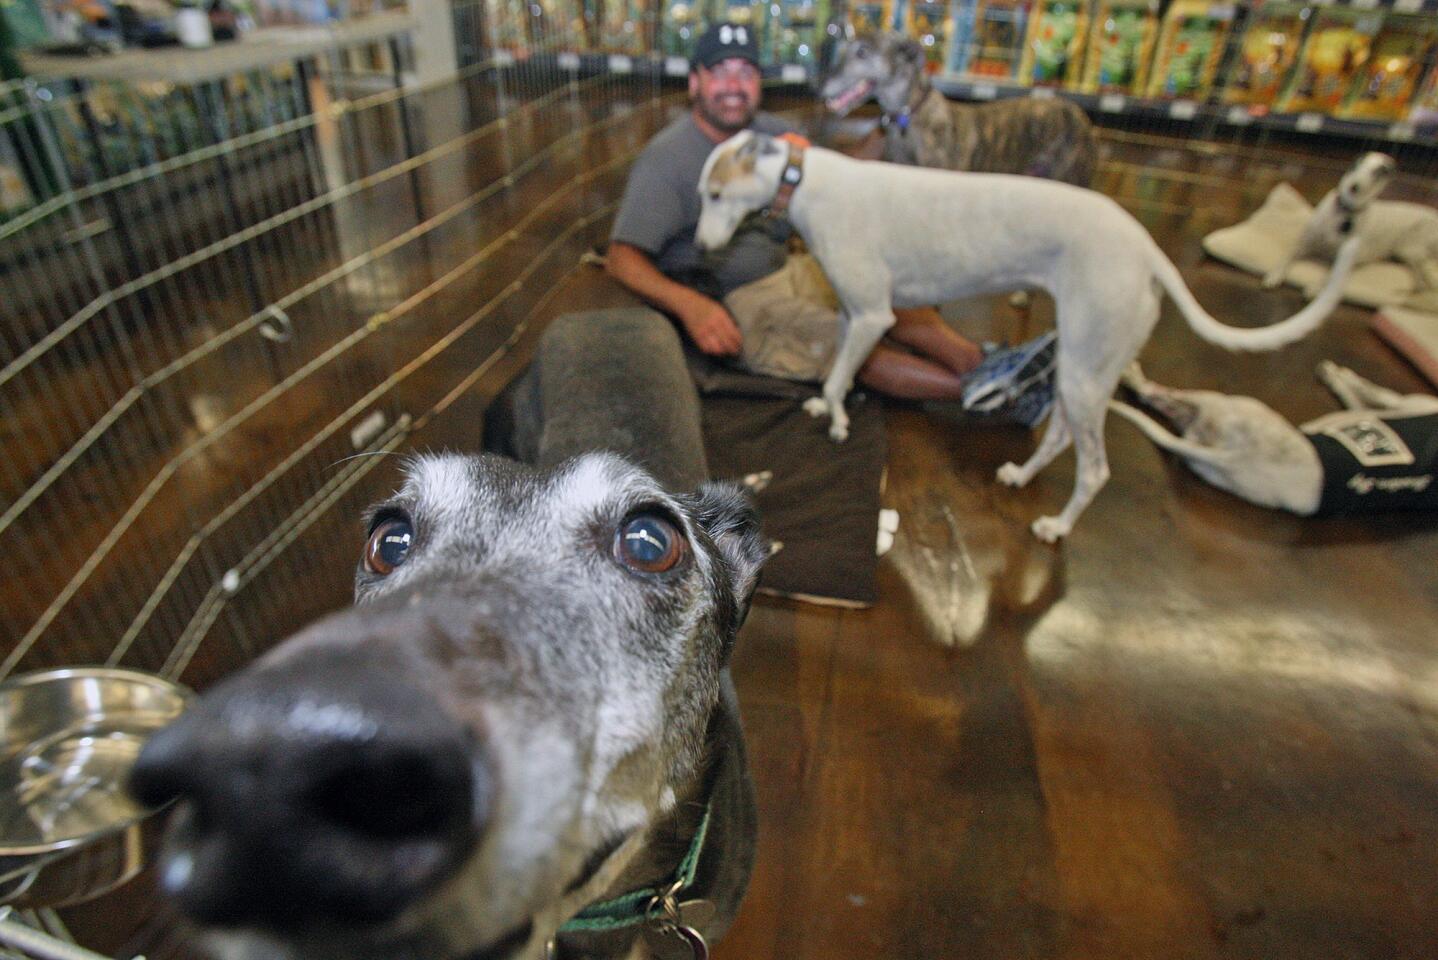 Greyhound Eddie gets close hoping to be petted with Scott Atwell sitting with other greyhounds in the background at Centinela Feed & Pet Supplies in Burbank where Grey Save sets up a pen with a group of personal grey hounds to let people know about their organization on Saturday, July 5, 2014. Grey Save has been setting up at the pet store on Saturdays since December. All the dogs in the pen are former racing dogs.